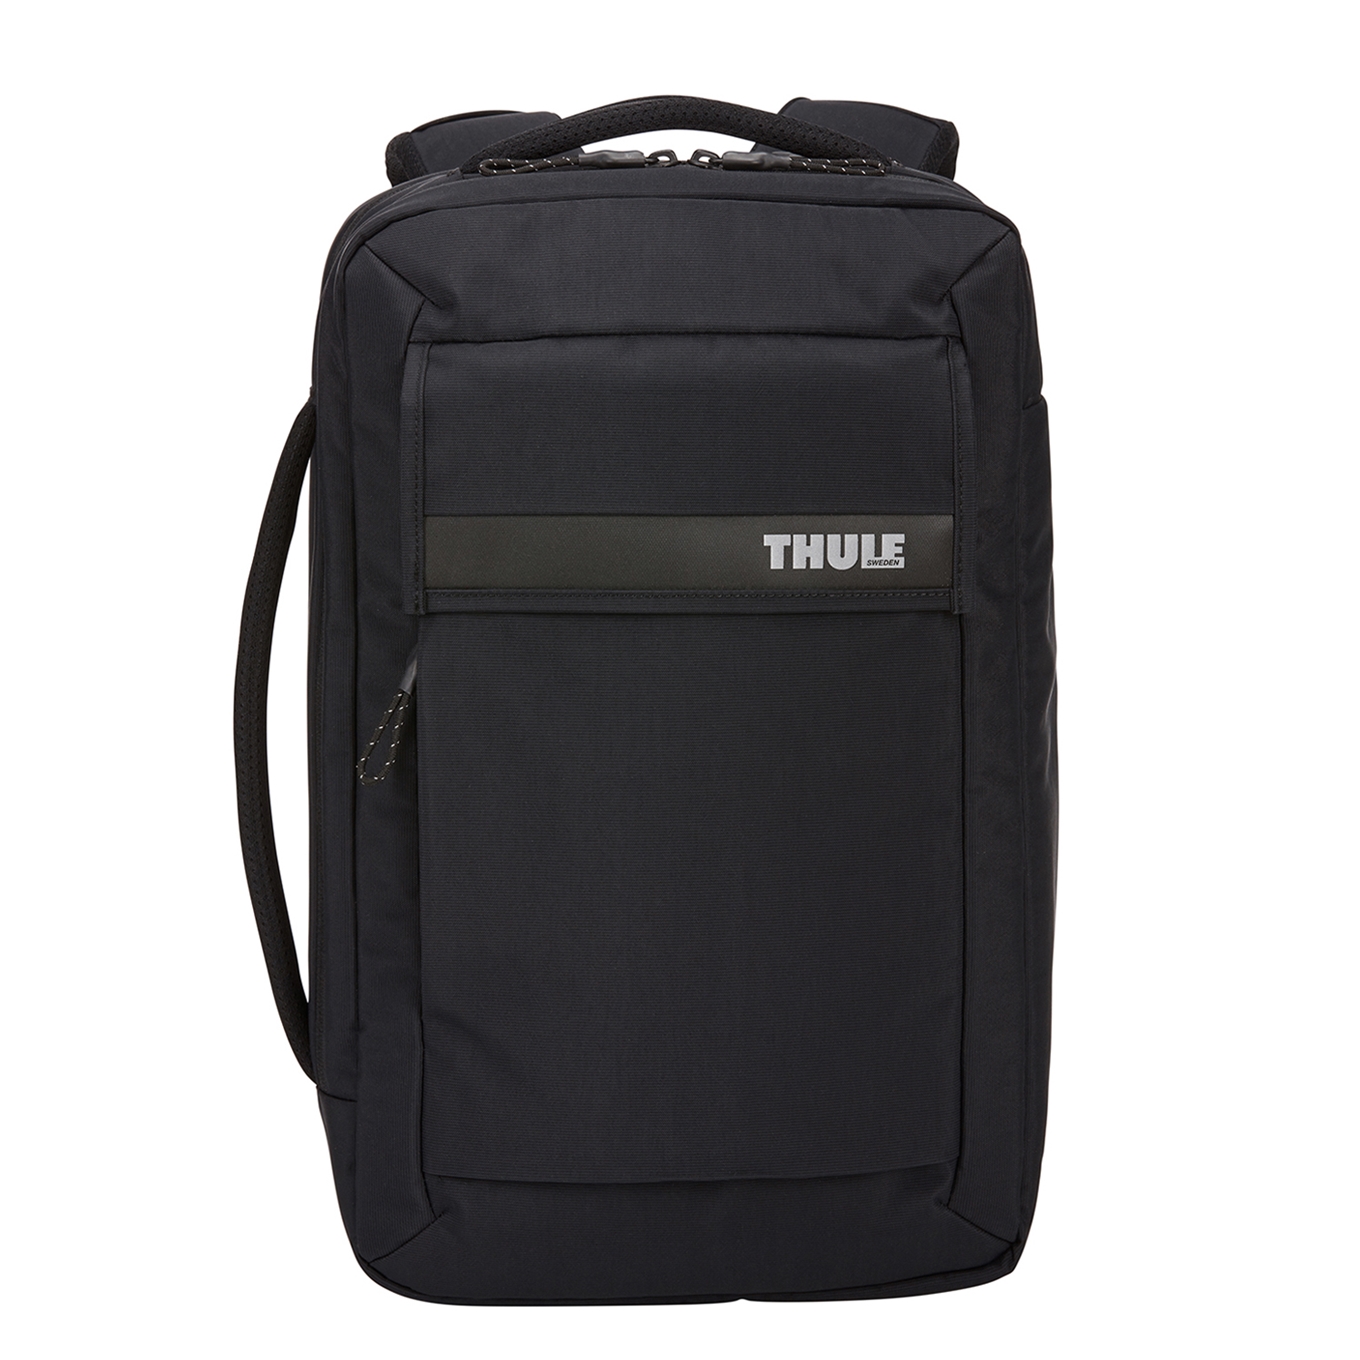 Thule Paramount Convertible Backpack 16L black backpack